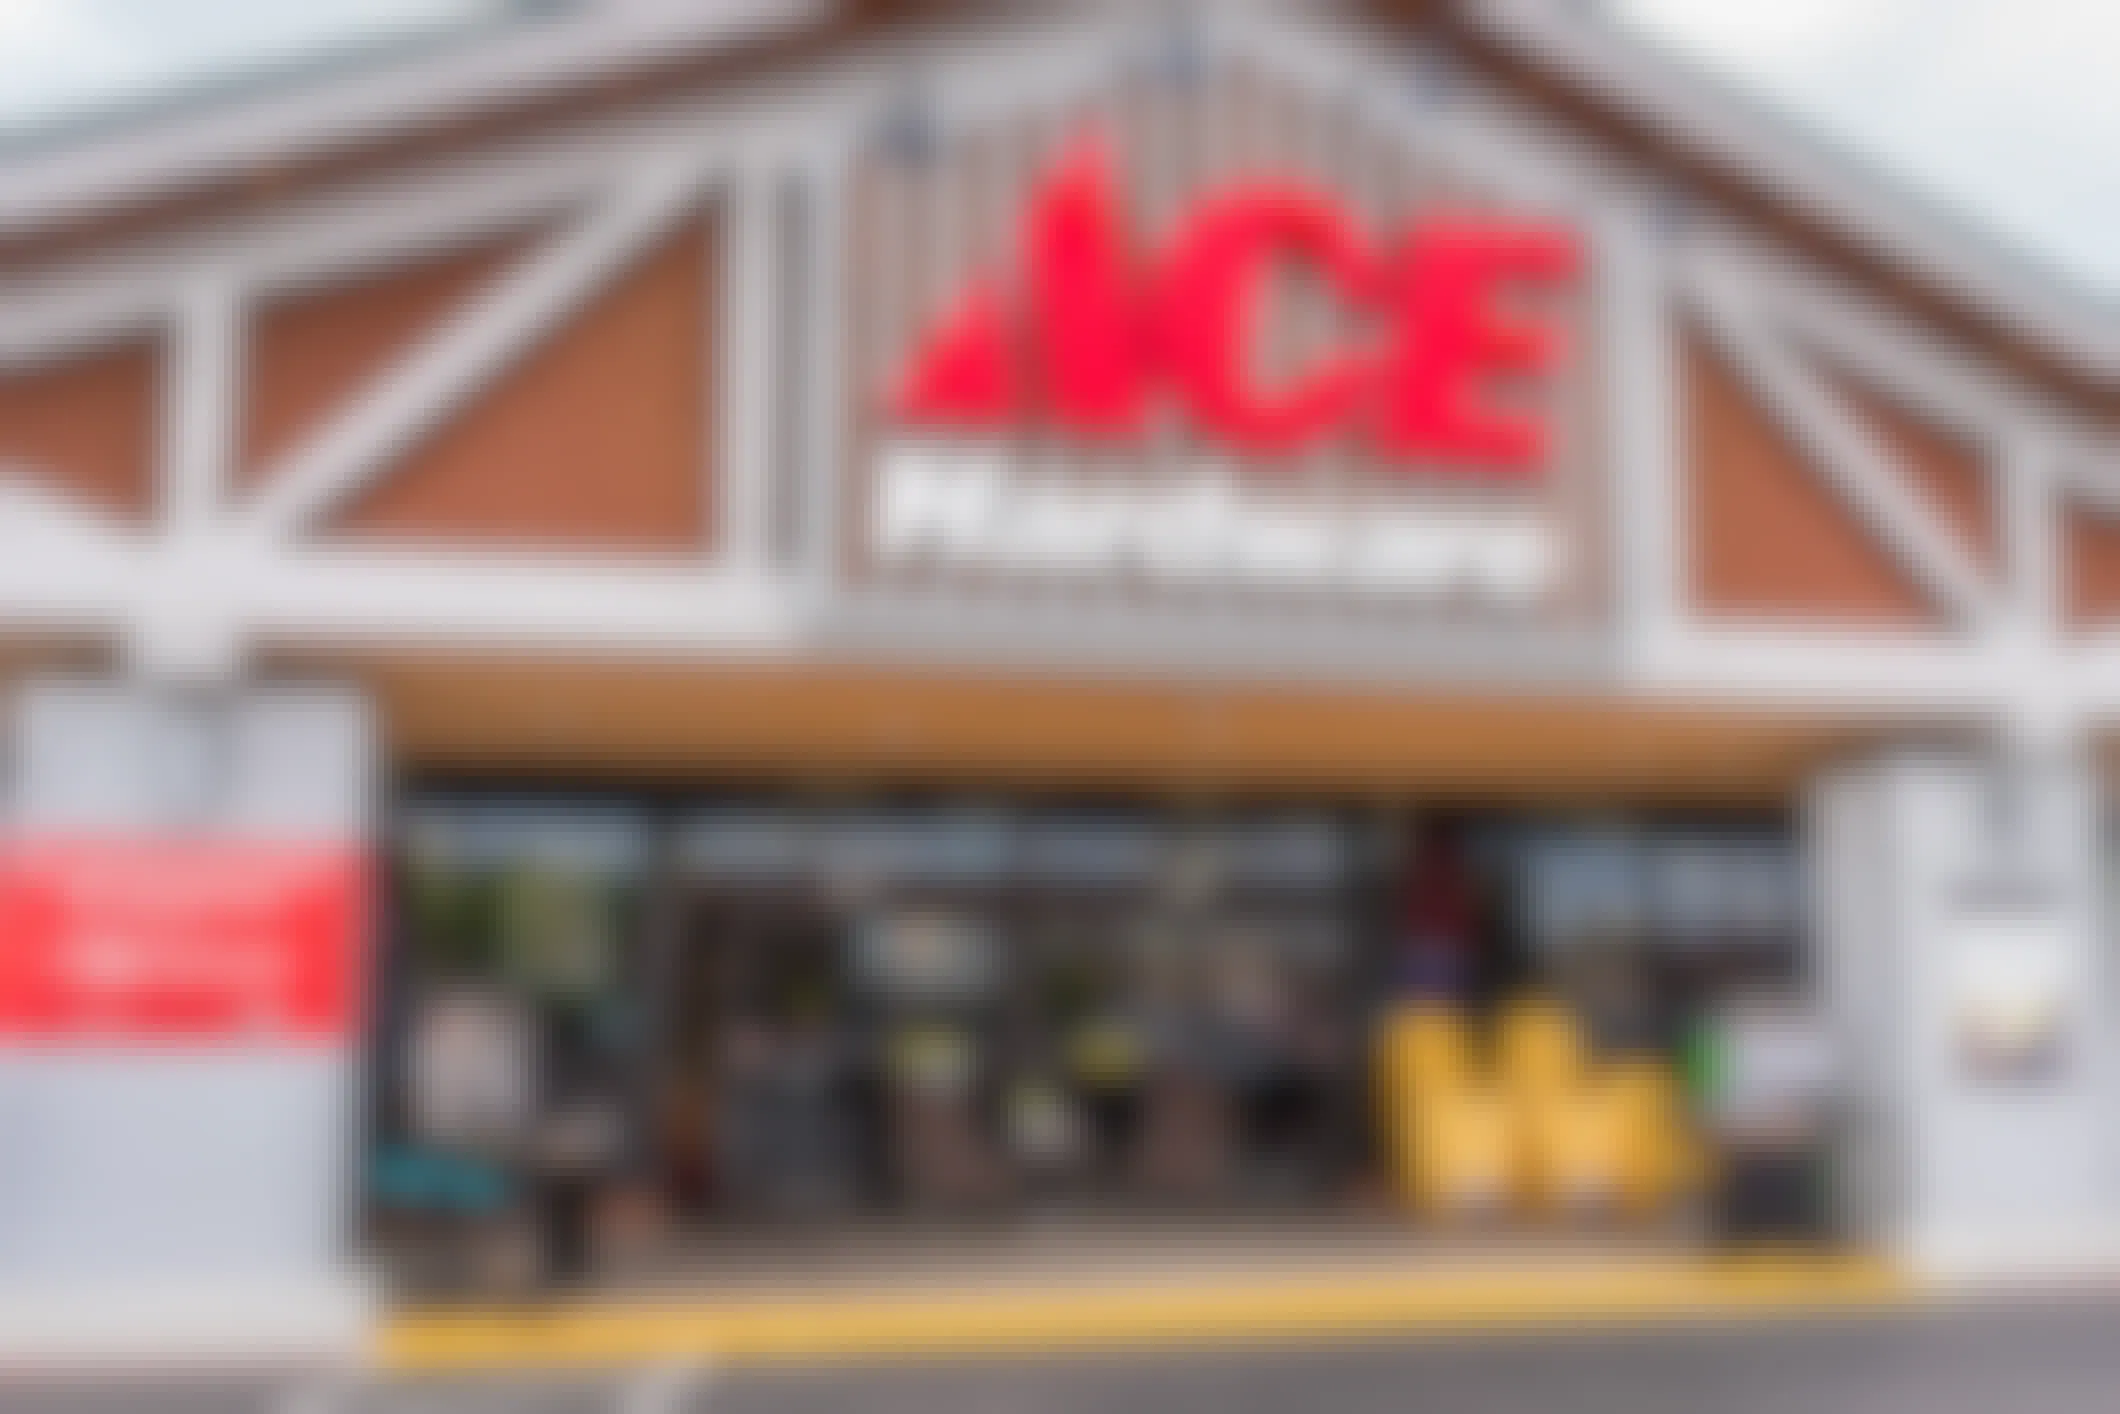 Outside of an Ace hardware store 2020